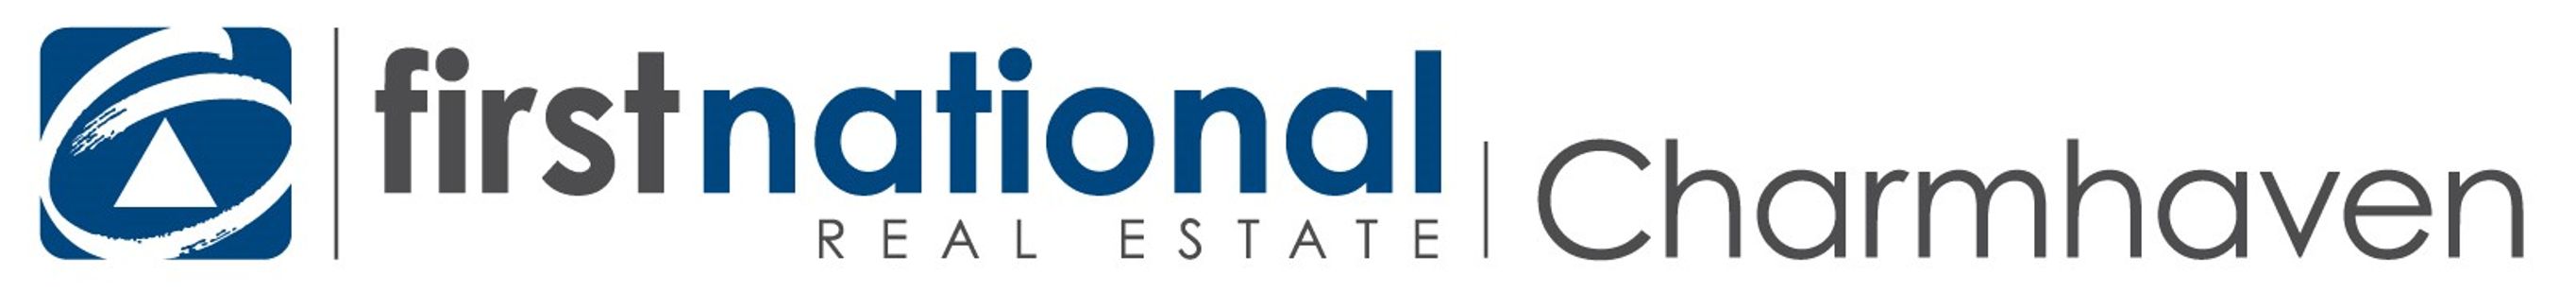 Real Estate Agency First National - Charmhaven 